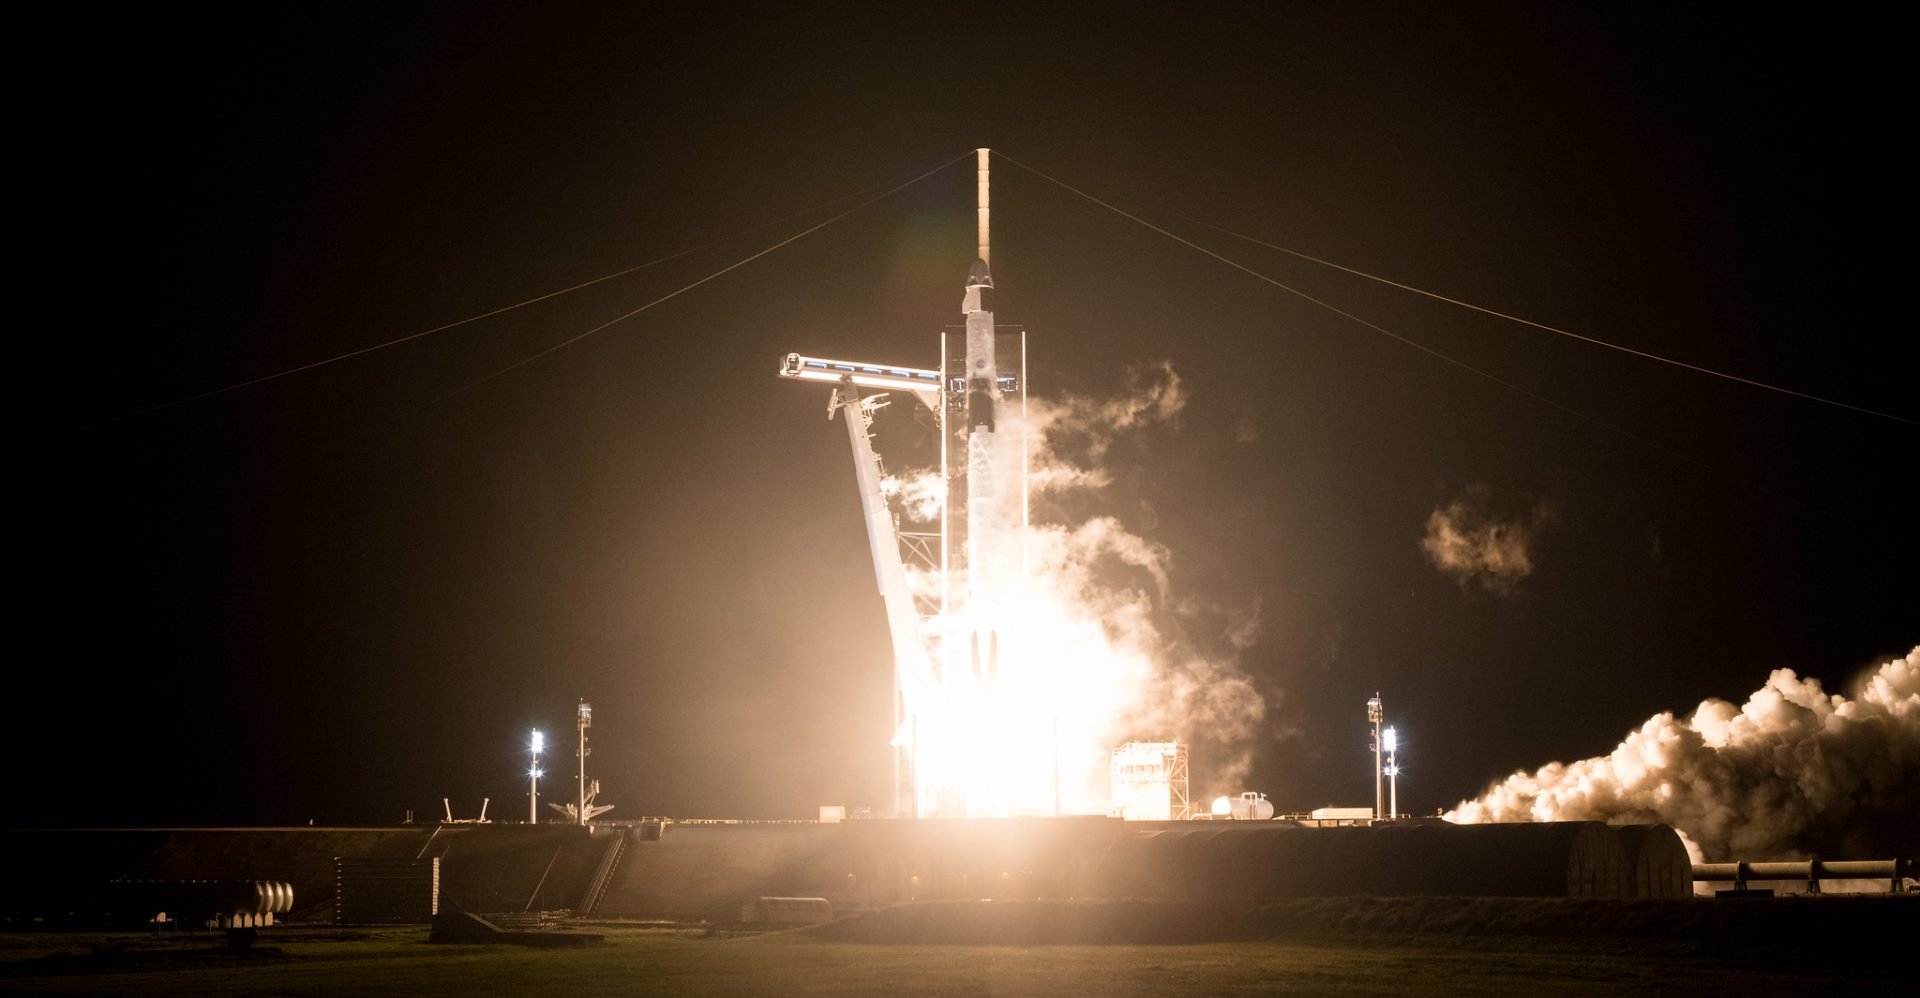 Trump and Biden hail SpaceX’s Crew-1 astronaut delivery success for NASA